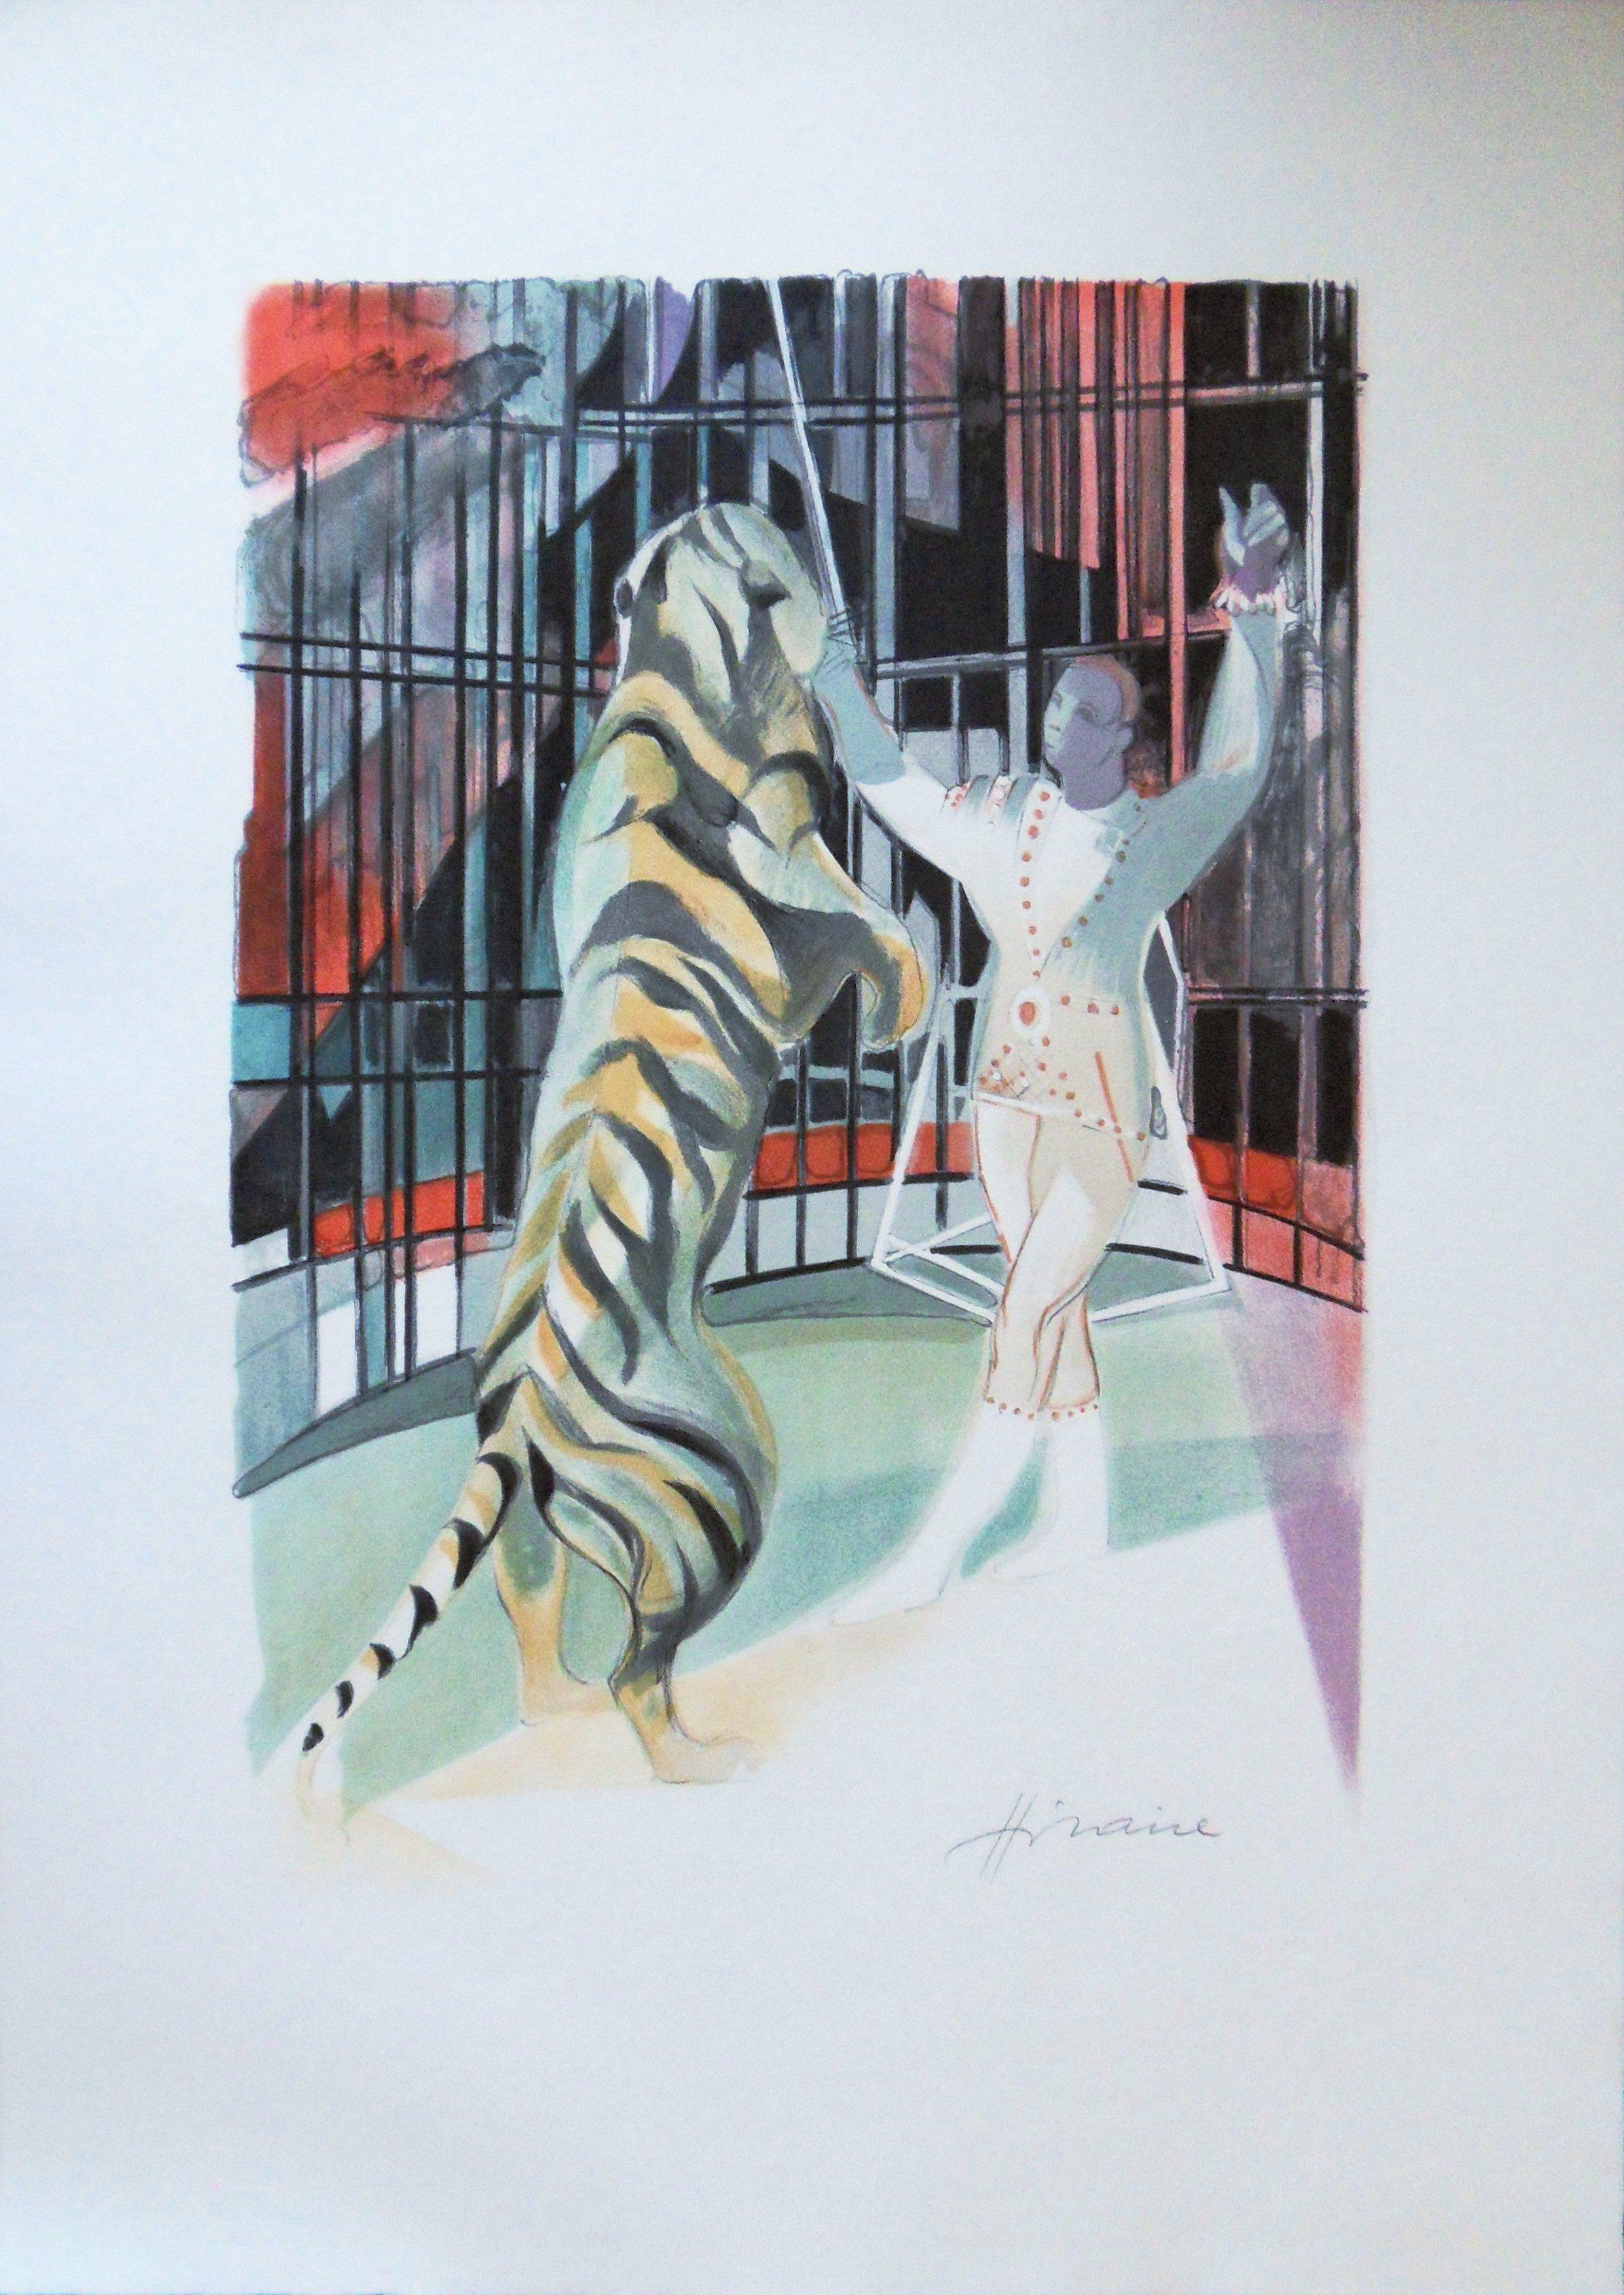 Camille Hilaire Animal Print - Circus : Tiger on Scene - Original handsigned lithograph